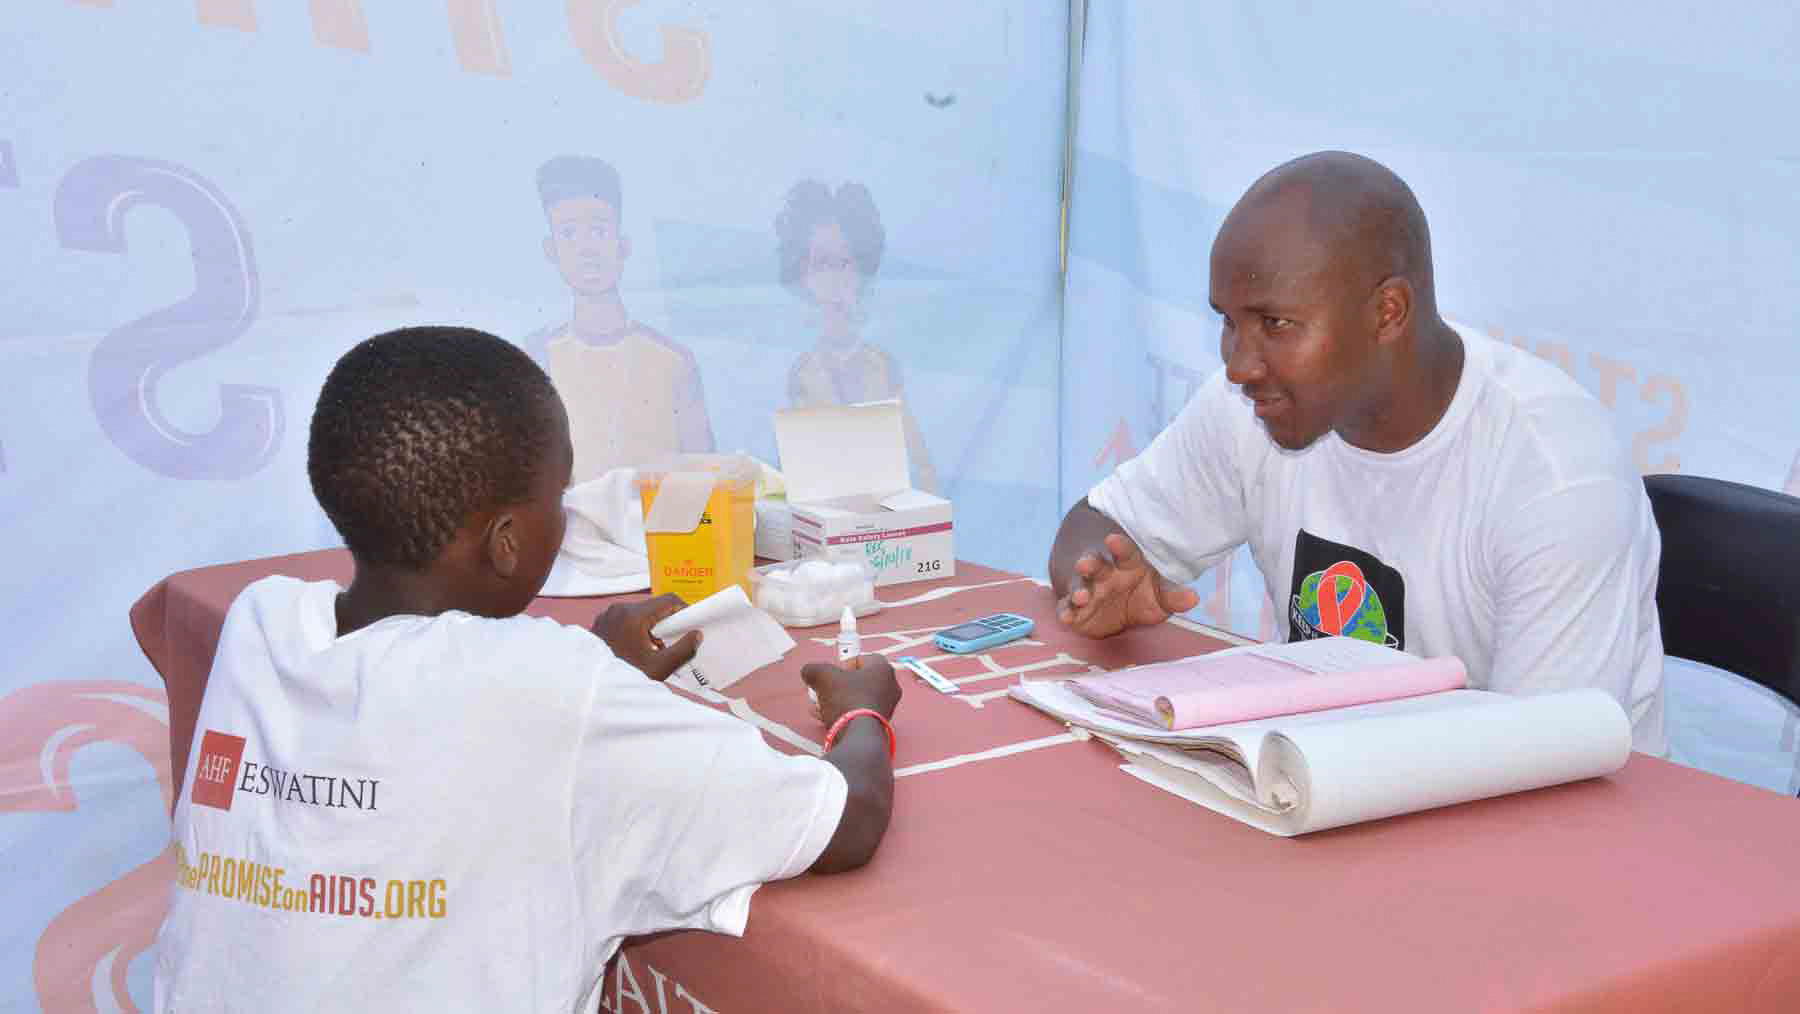 ahf eswatini free hiv testing counselor and young patient